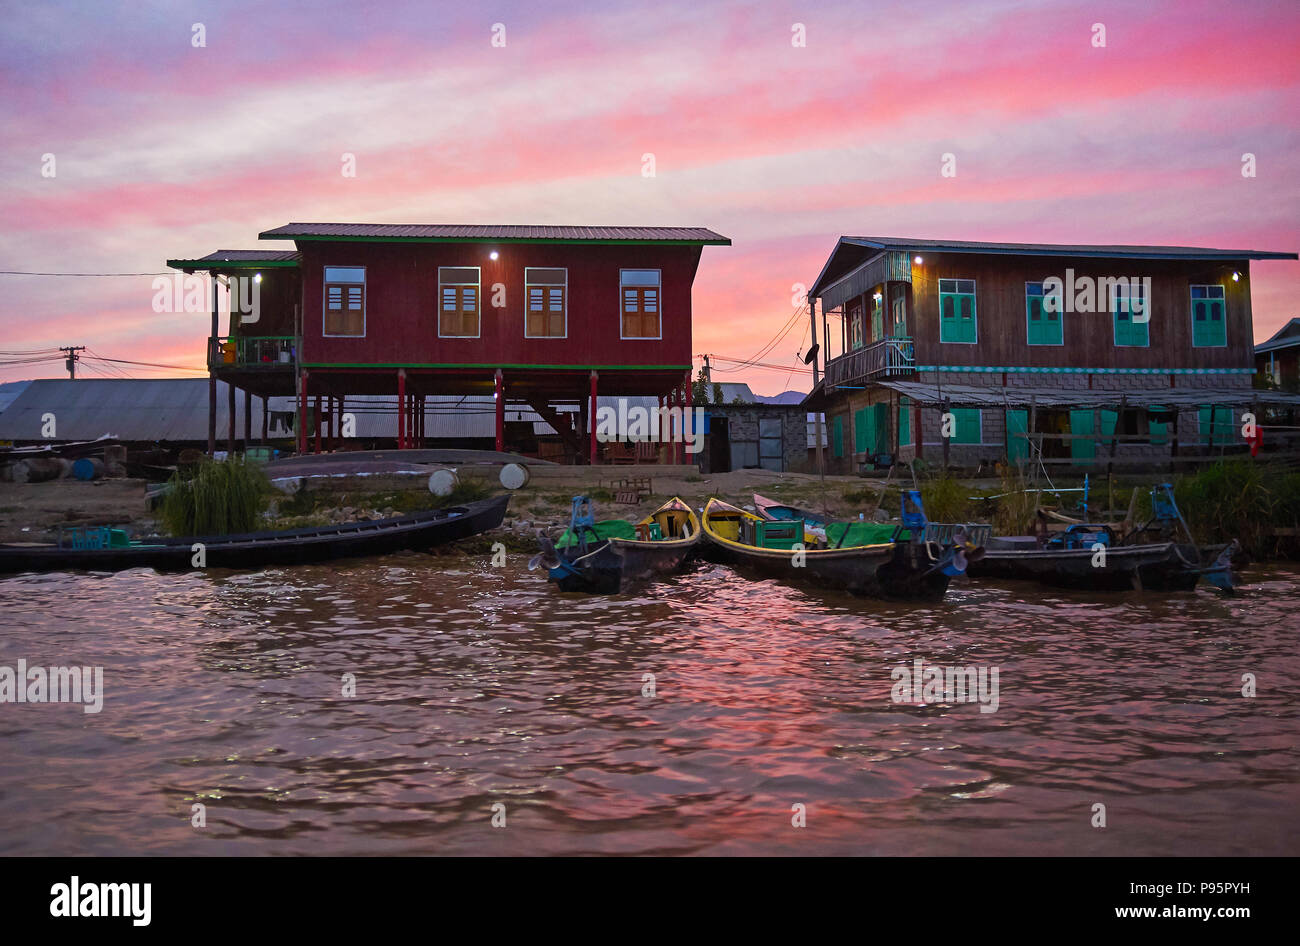 The cloudy twilight sky over the stilt houses of Nyaungshwe tourist village, Inle Lake, Myanmar. Stock Photo